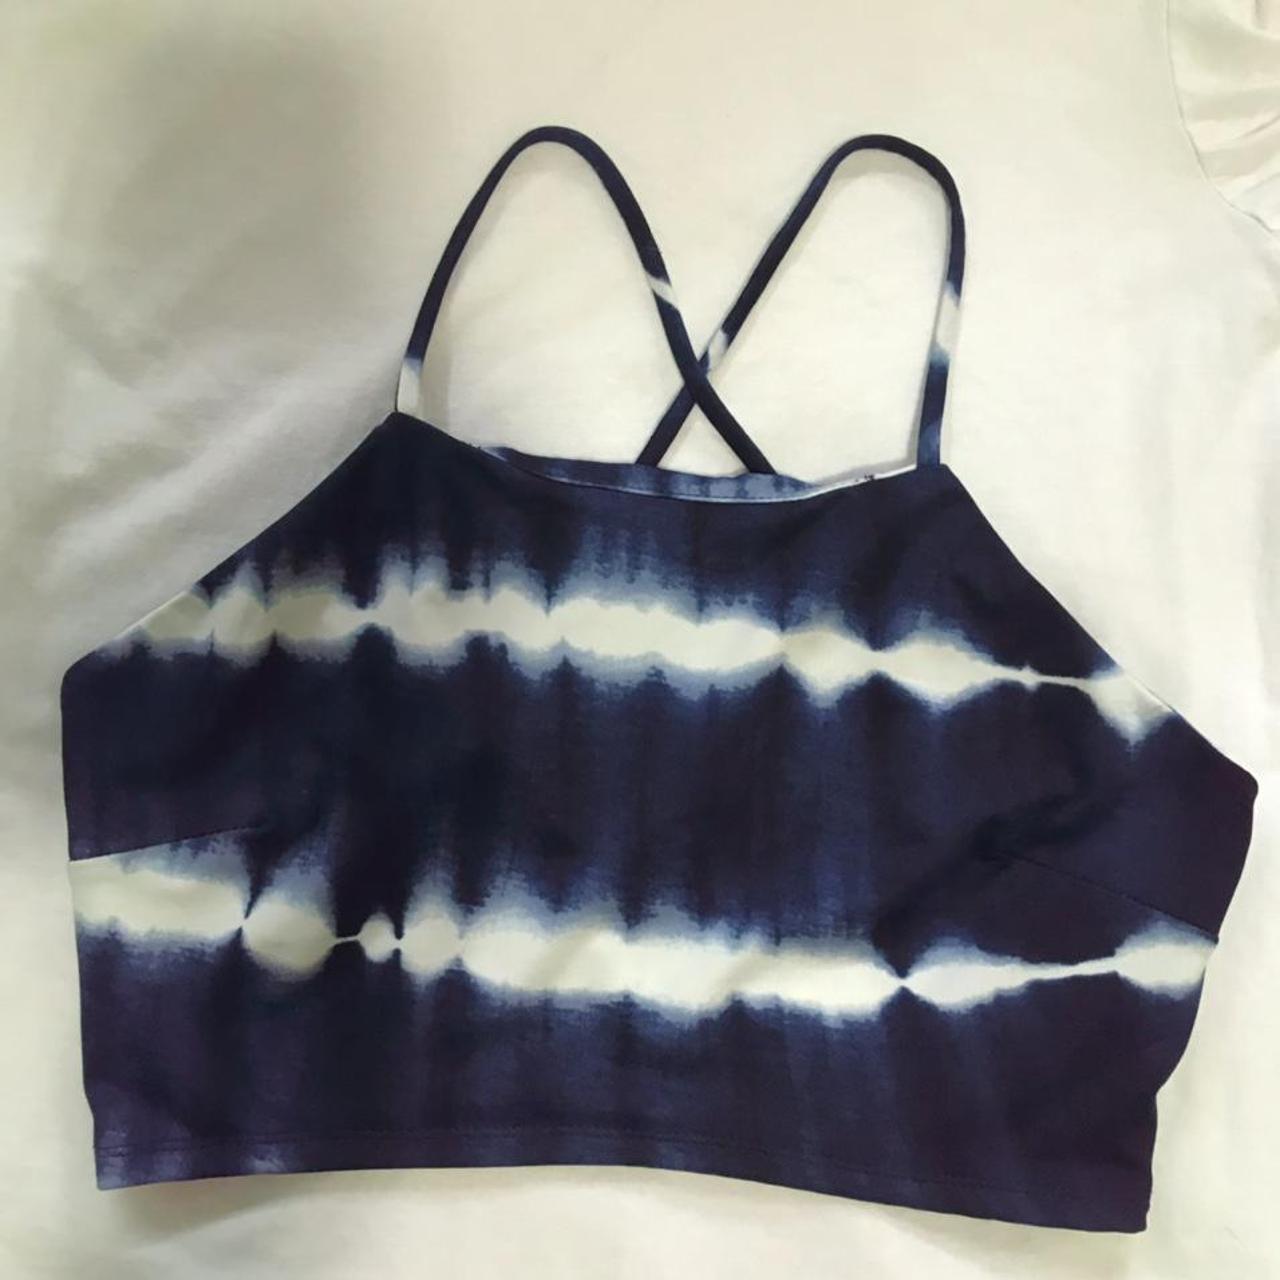 Product Image 1 - Cropped Halter Top
Super cute Blue